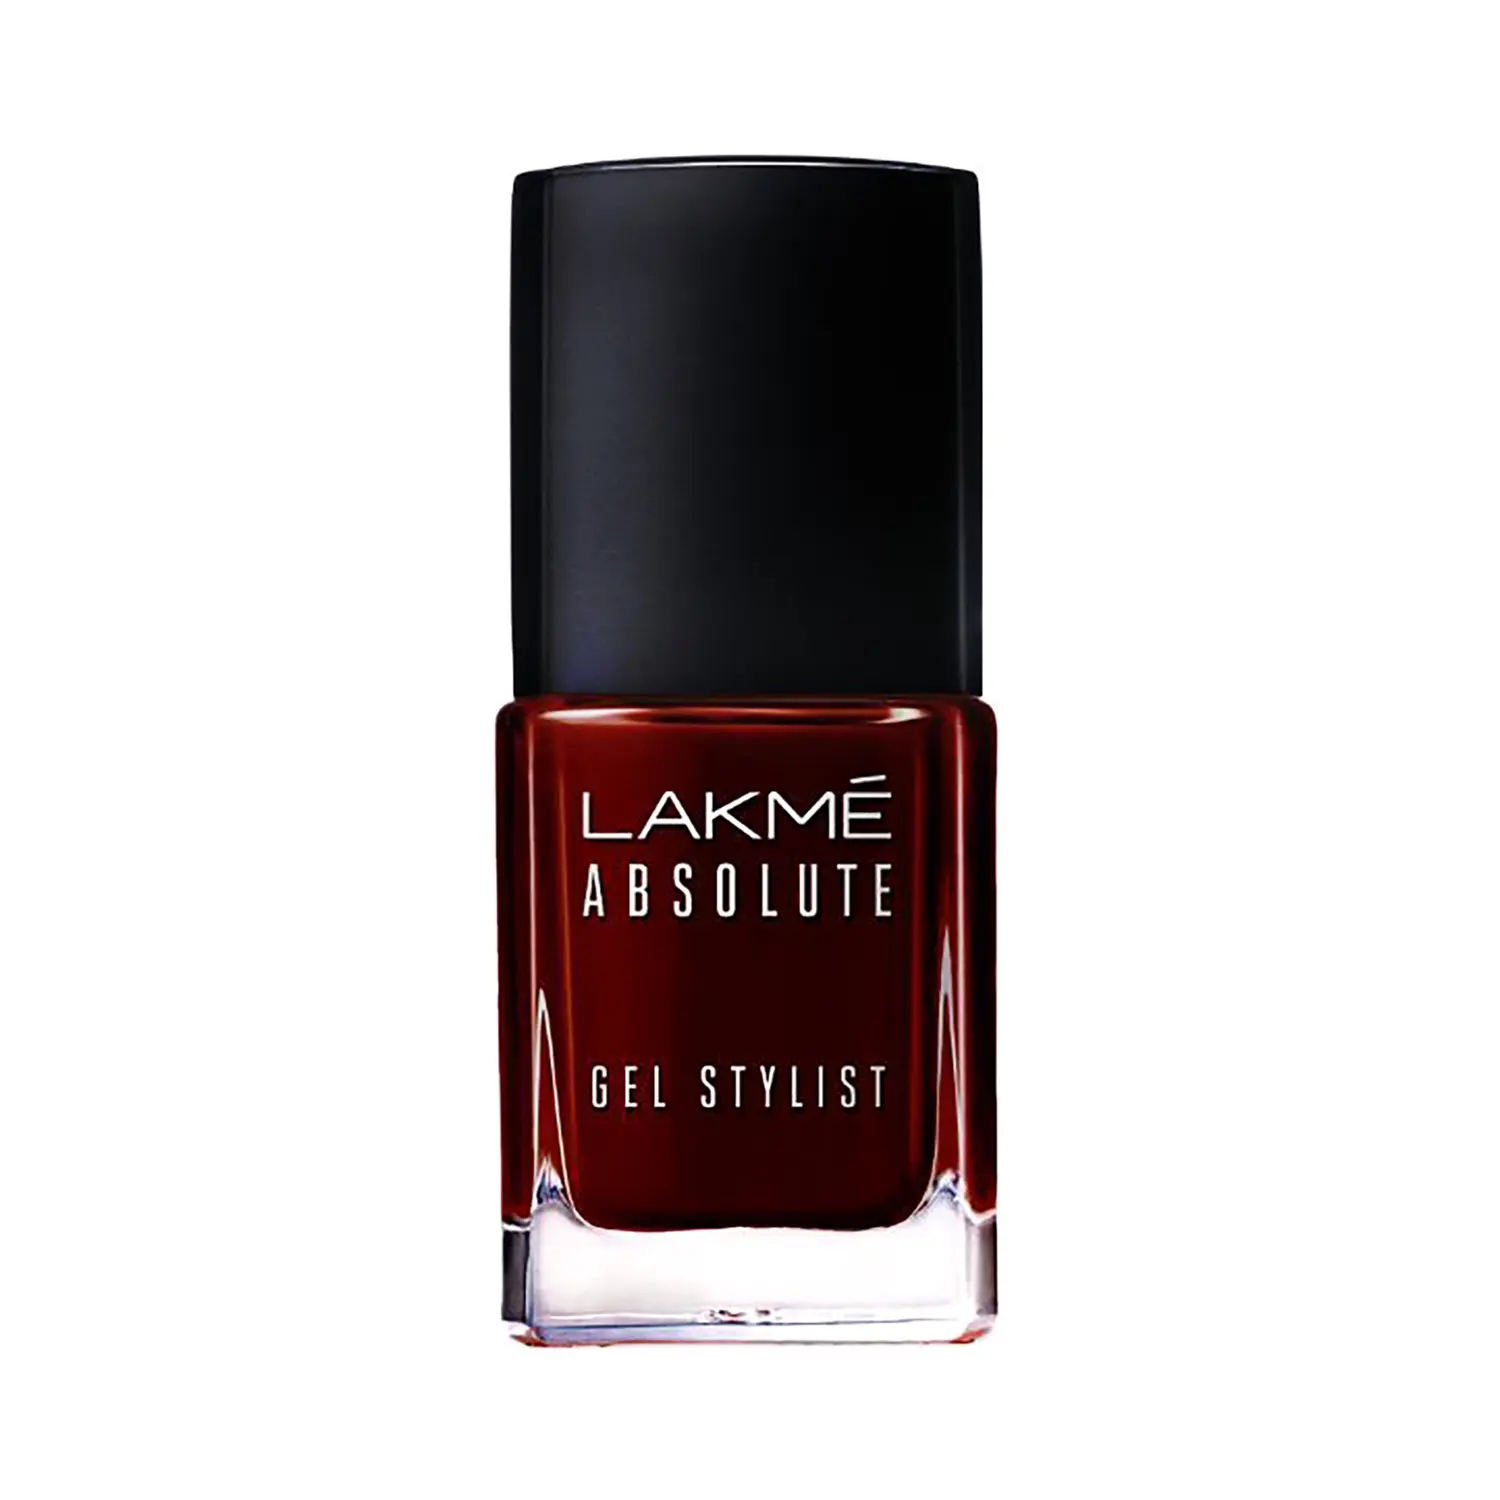 Lakme | Lakme Absolute Gel Stylist Nail Color - Enigma (12ml)